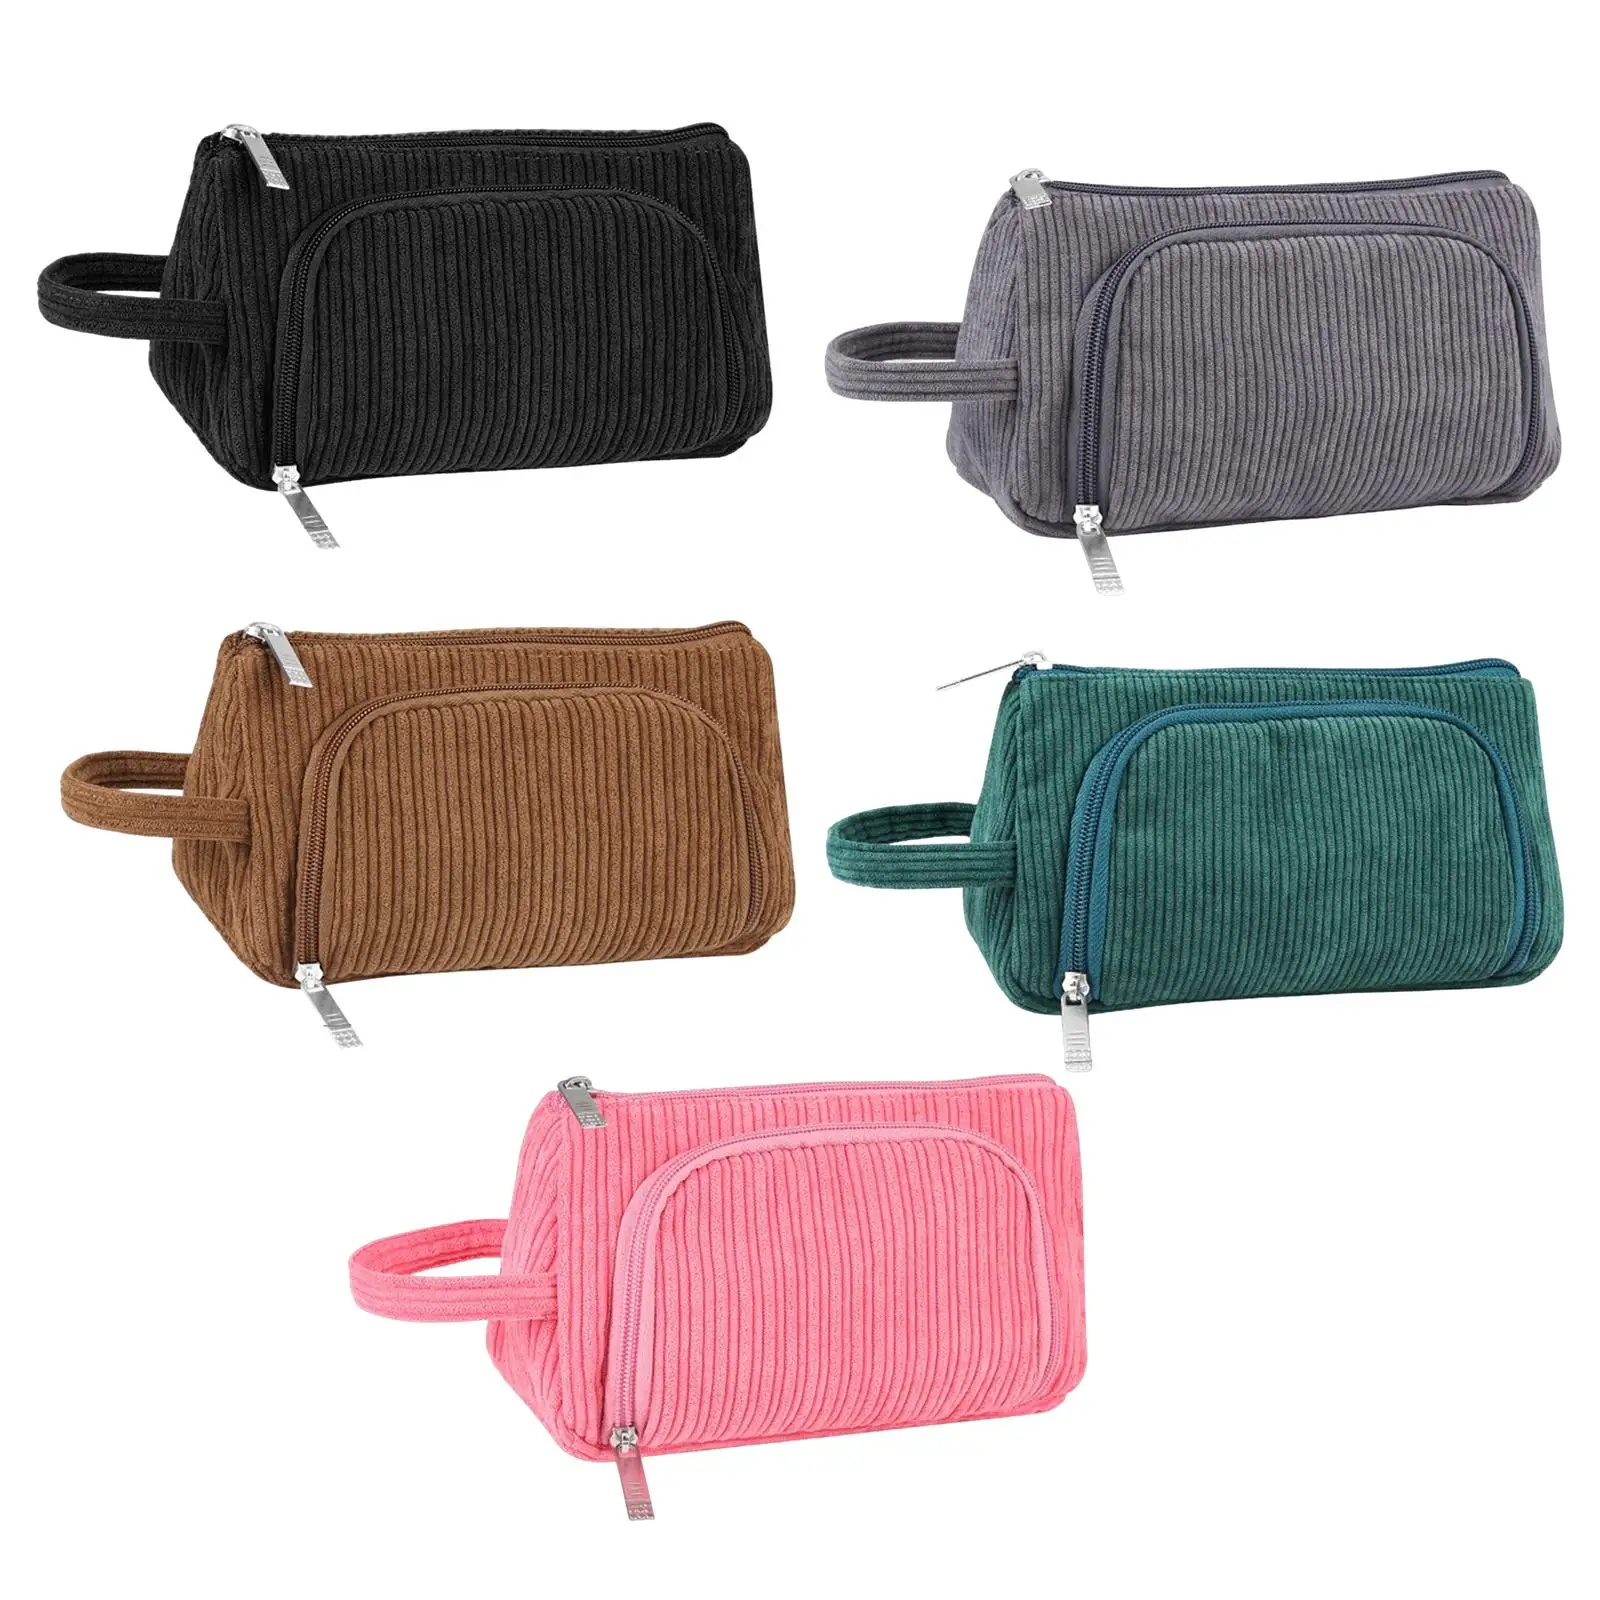 

Corduroy Cosmetic Bag Travel Toiletry Handbag with Zipper Closure for Vacation, Business Trip, Gym, Camping